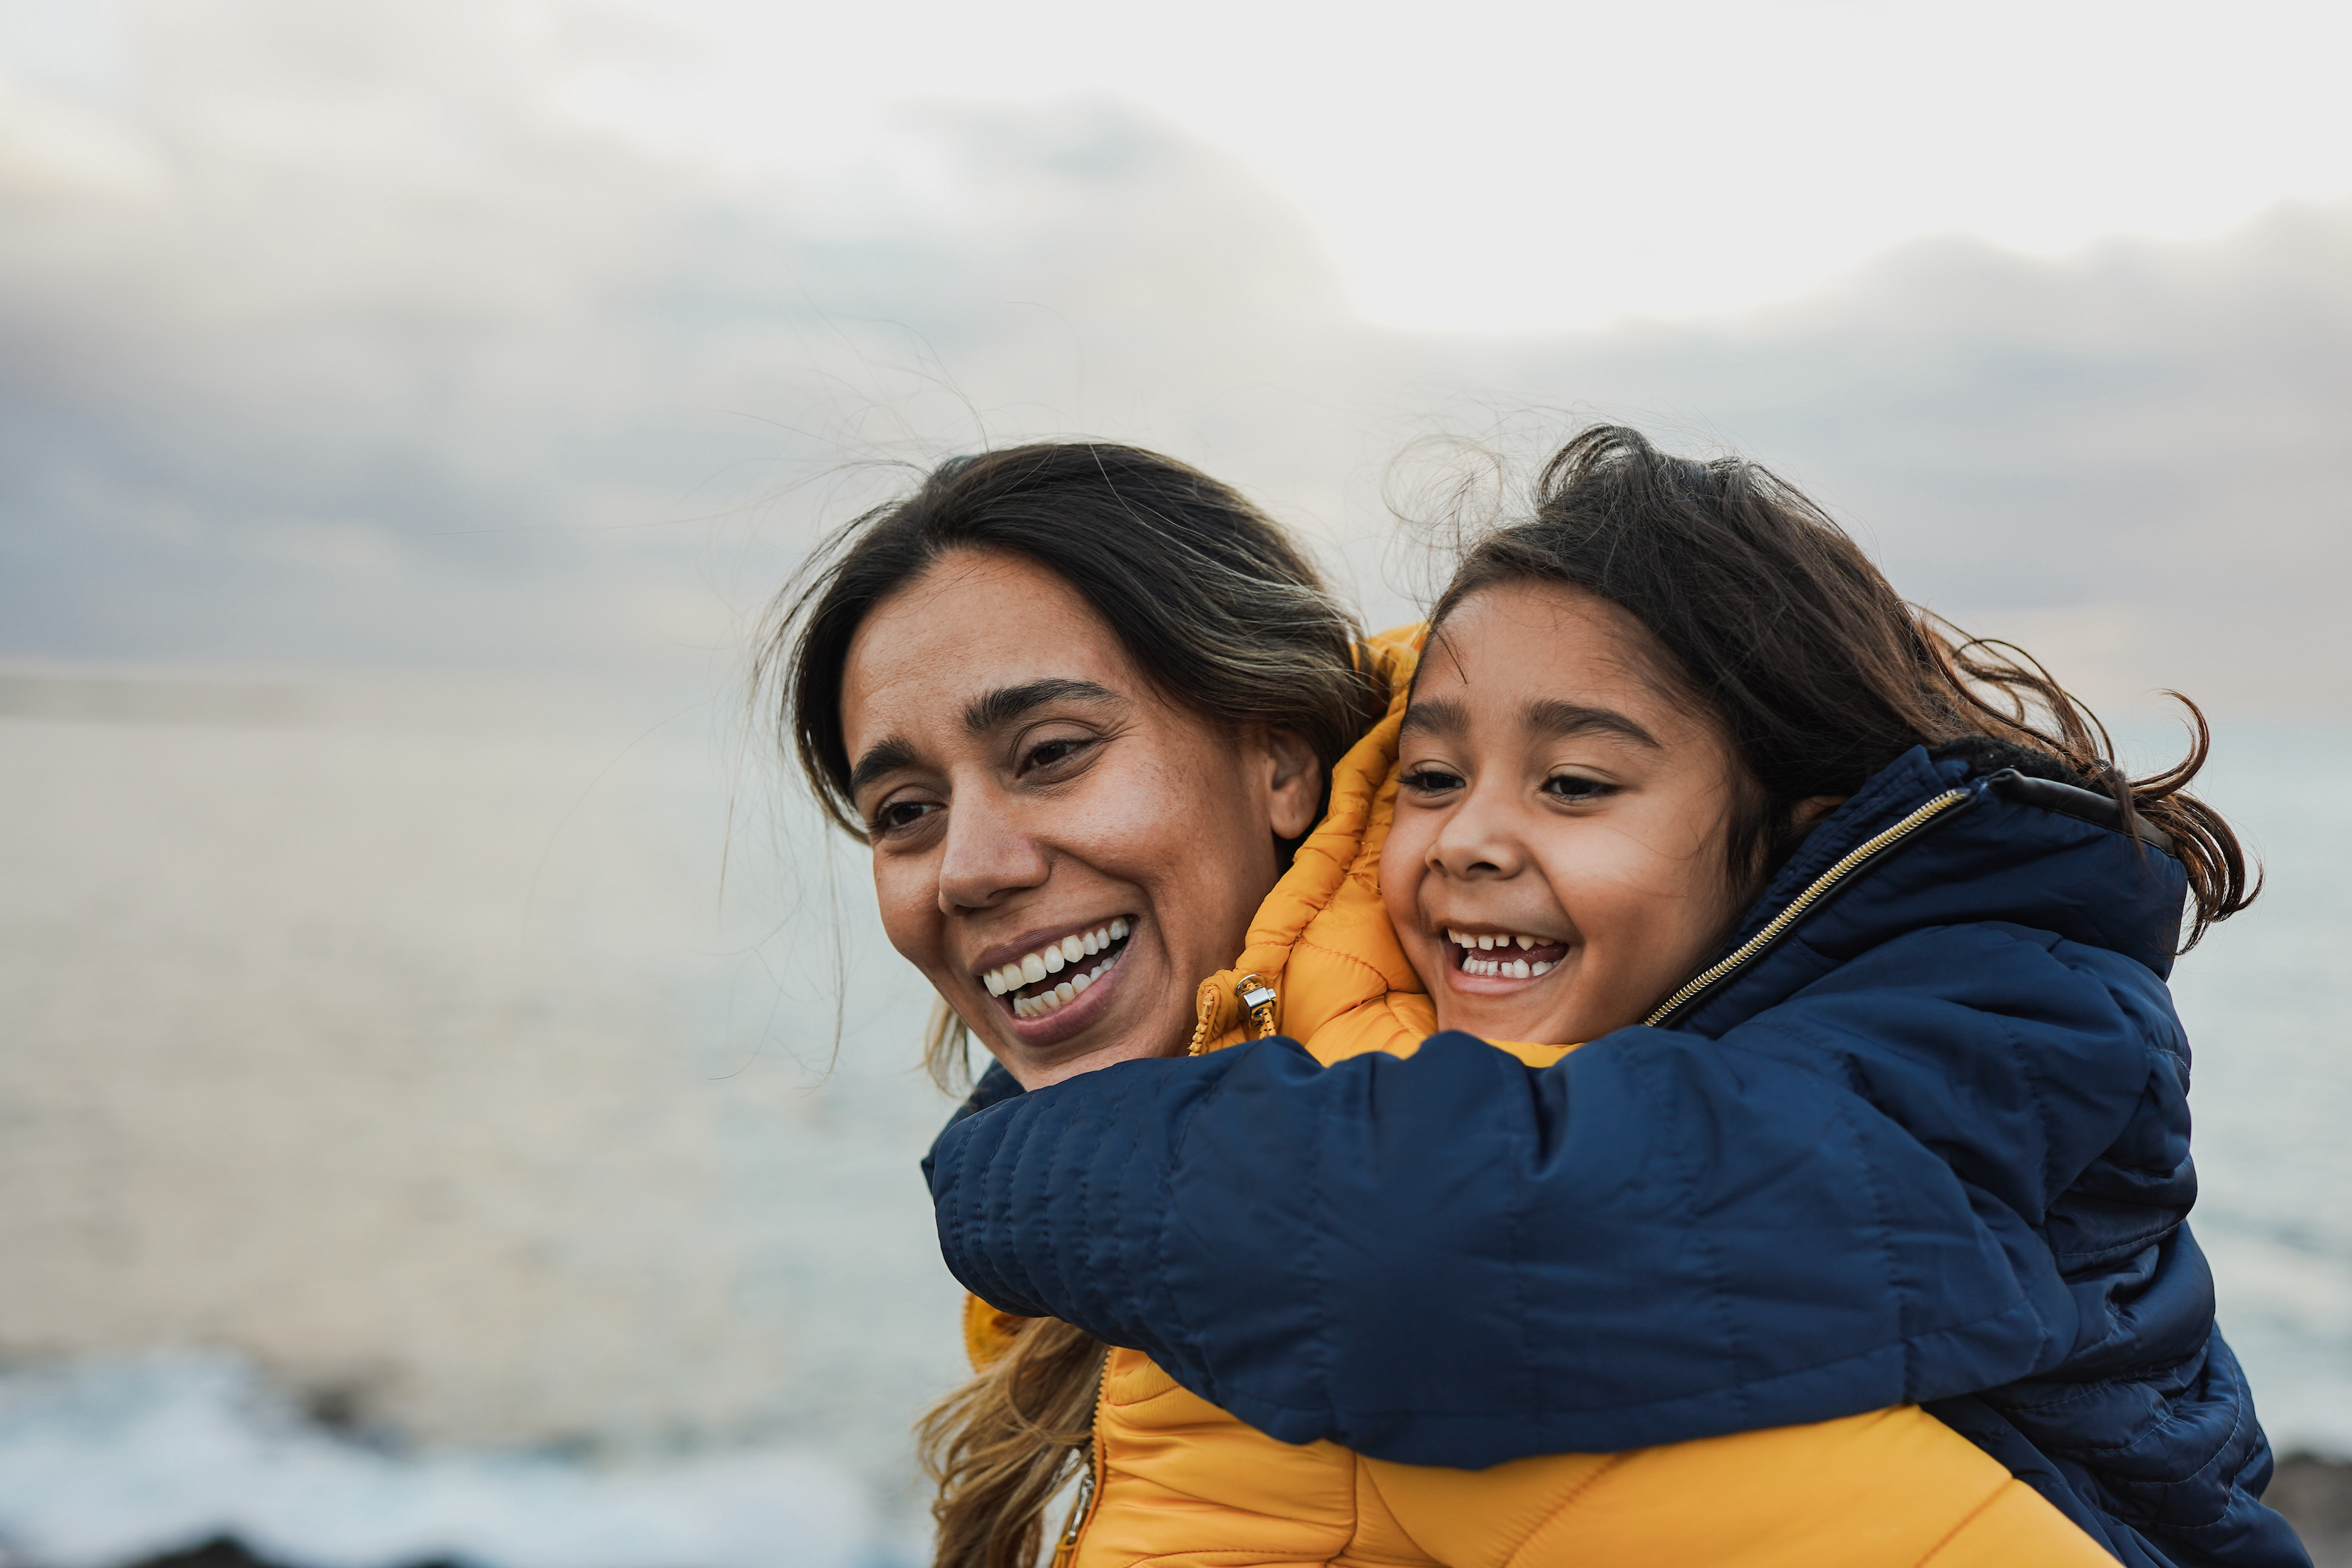 A woman carries her young daughter piggyback style. An estate plan estate plan plays a pivotal role in ensuring your assets end up in the right hands